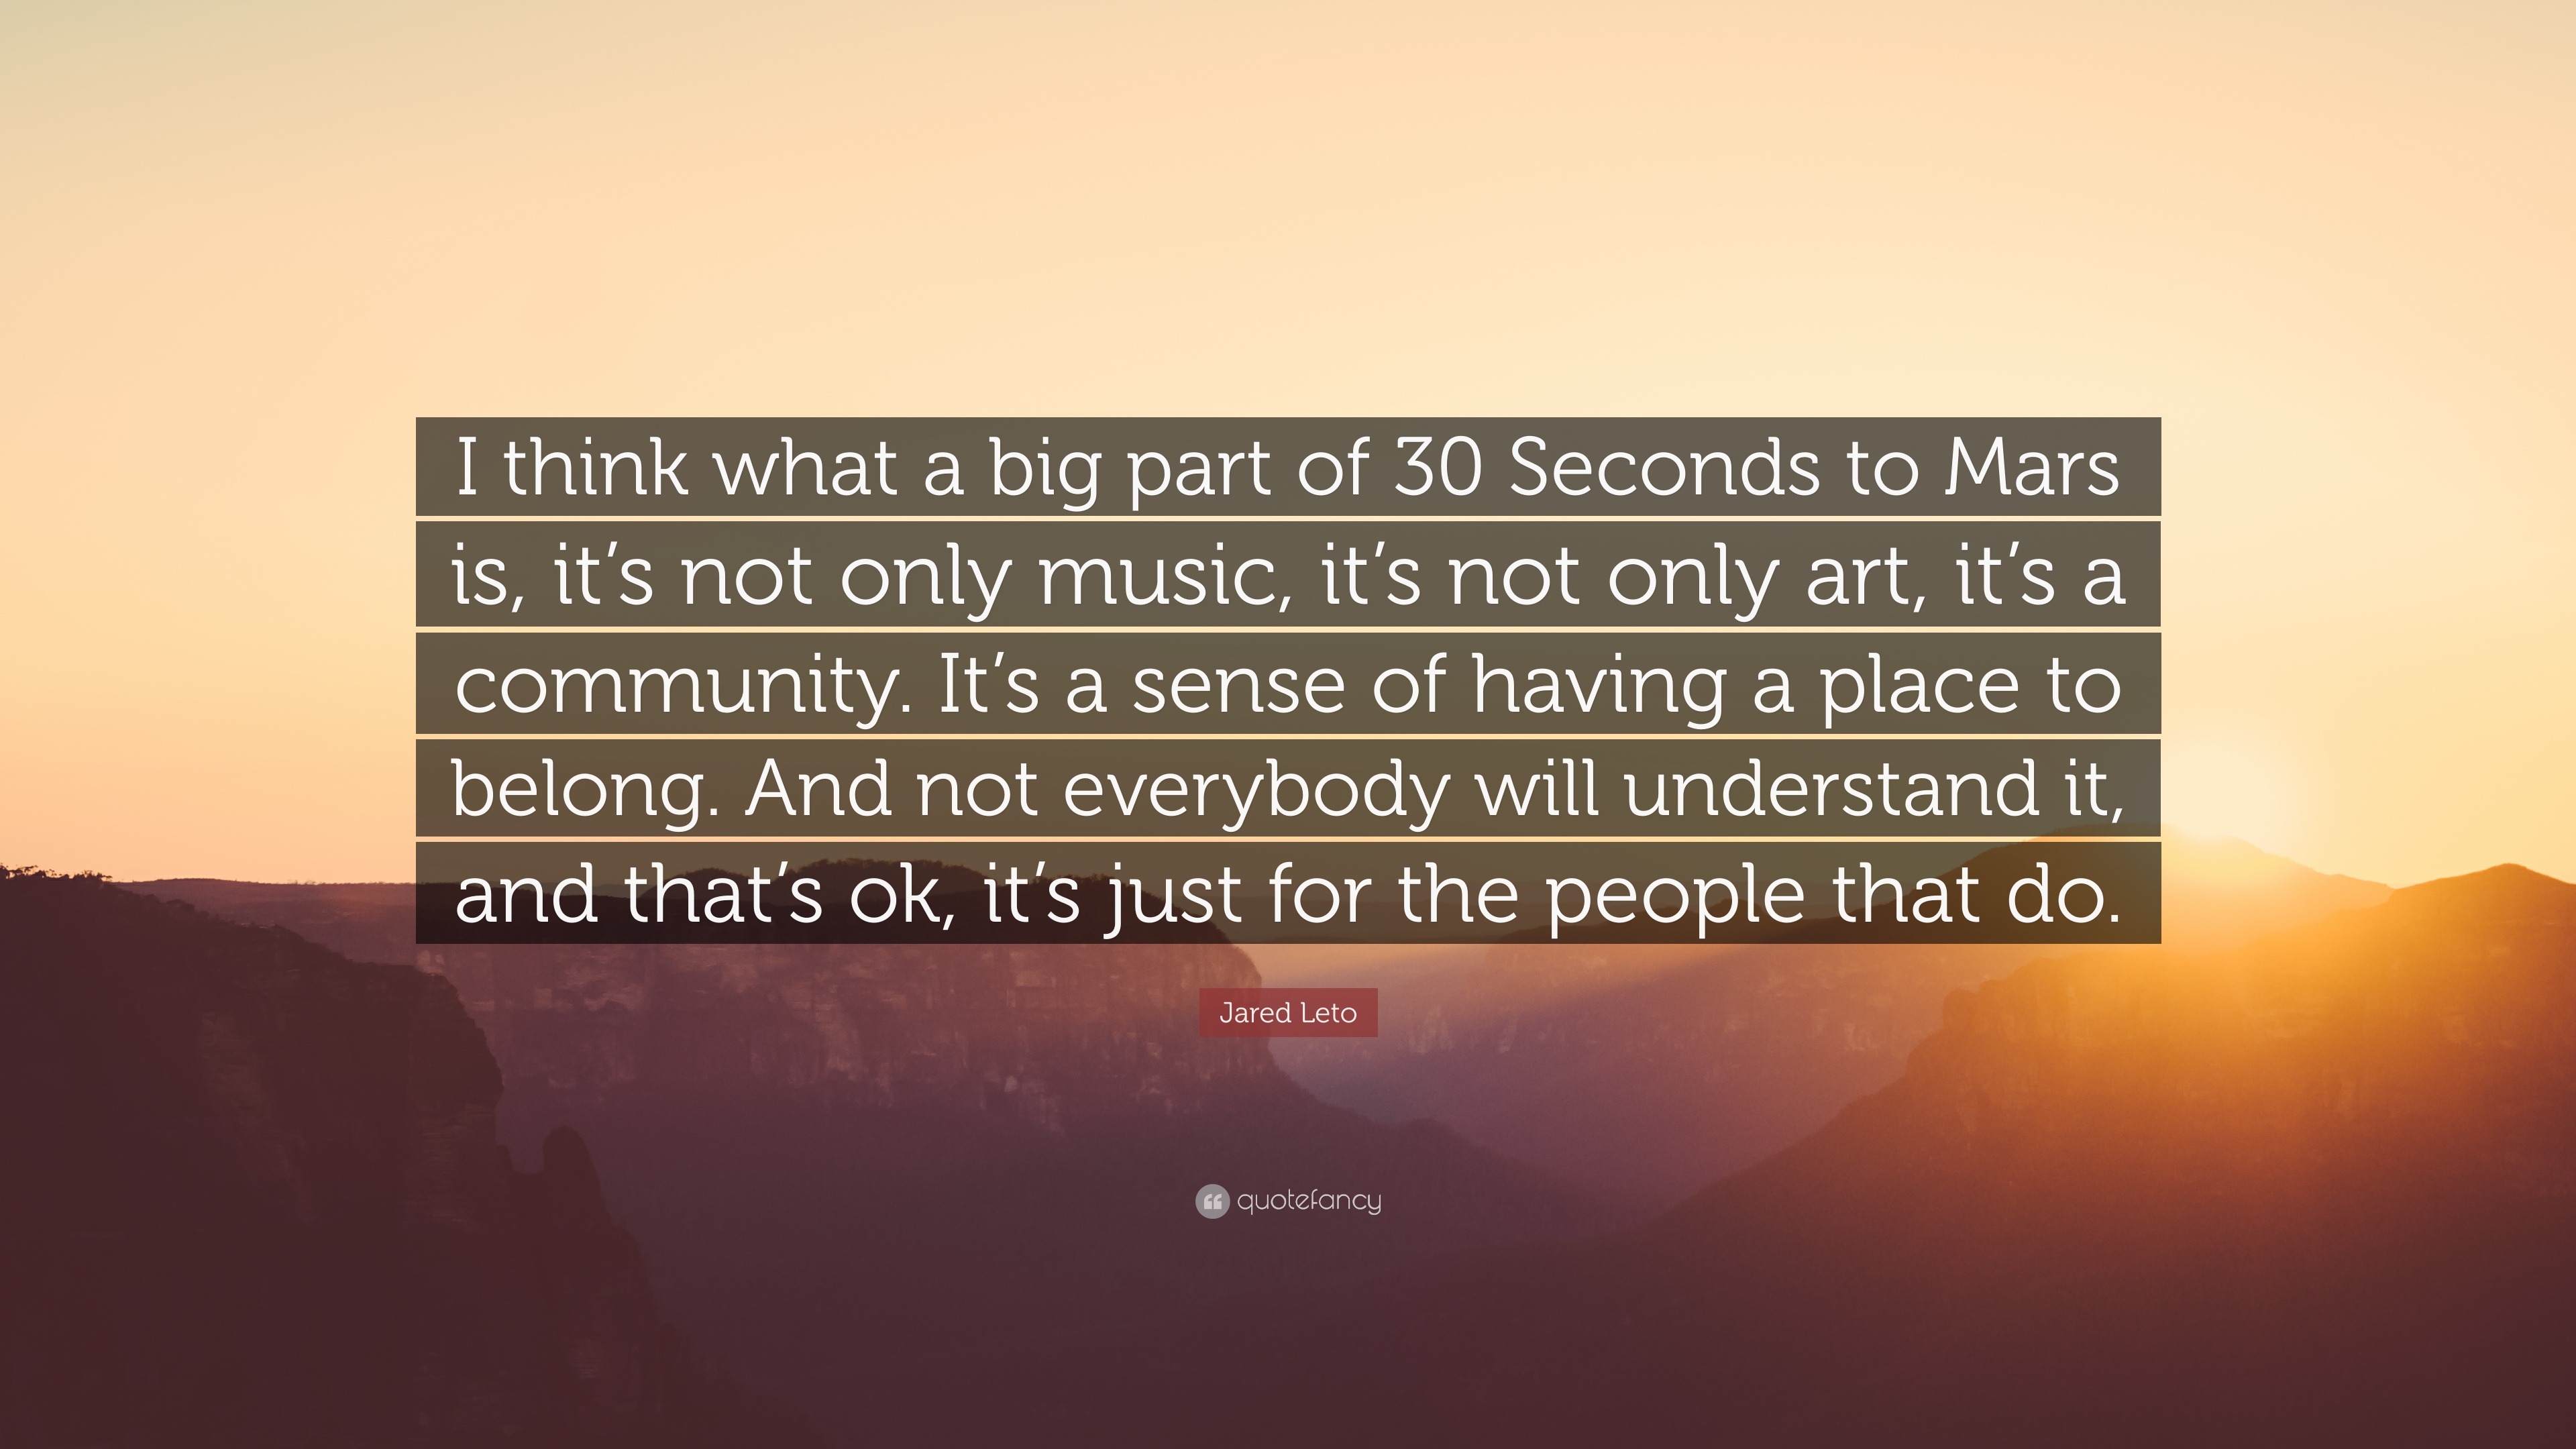 Jared Leto Quote: “I think what a big part of 30 Seconds to Mars is, it's  not only music, it's not only art, it's a community. It's a sense...”